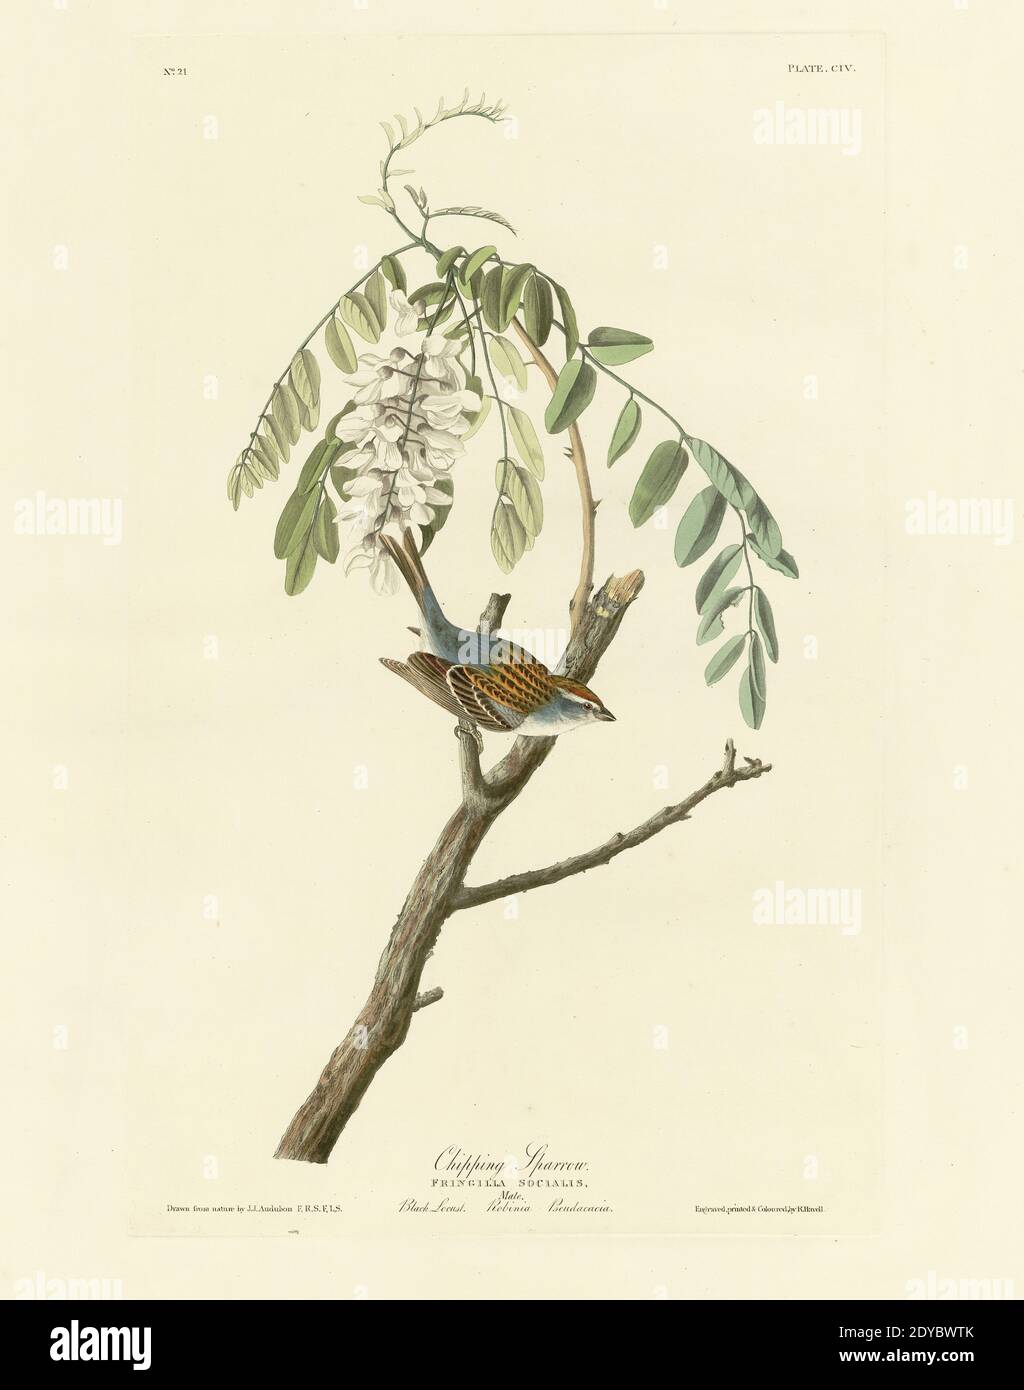 Plate 104 Chipping Sparrow, from The Birds of America folio (1827–1839) by John James Audubon - Very high resolution and quality edited image Stock Photo